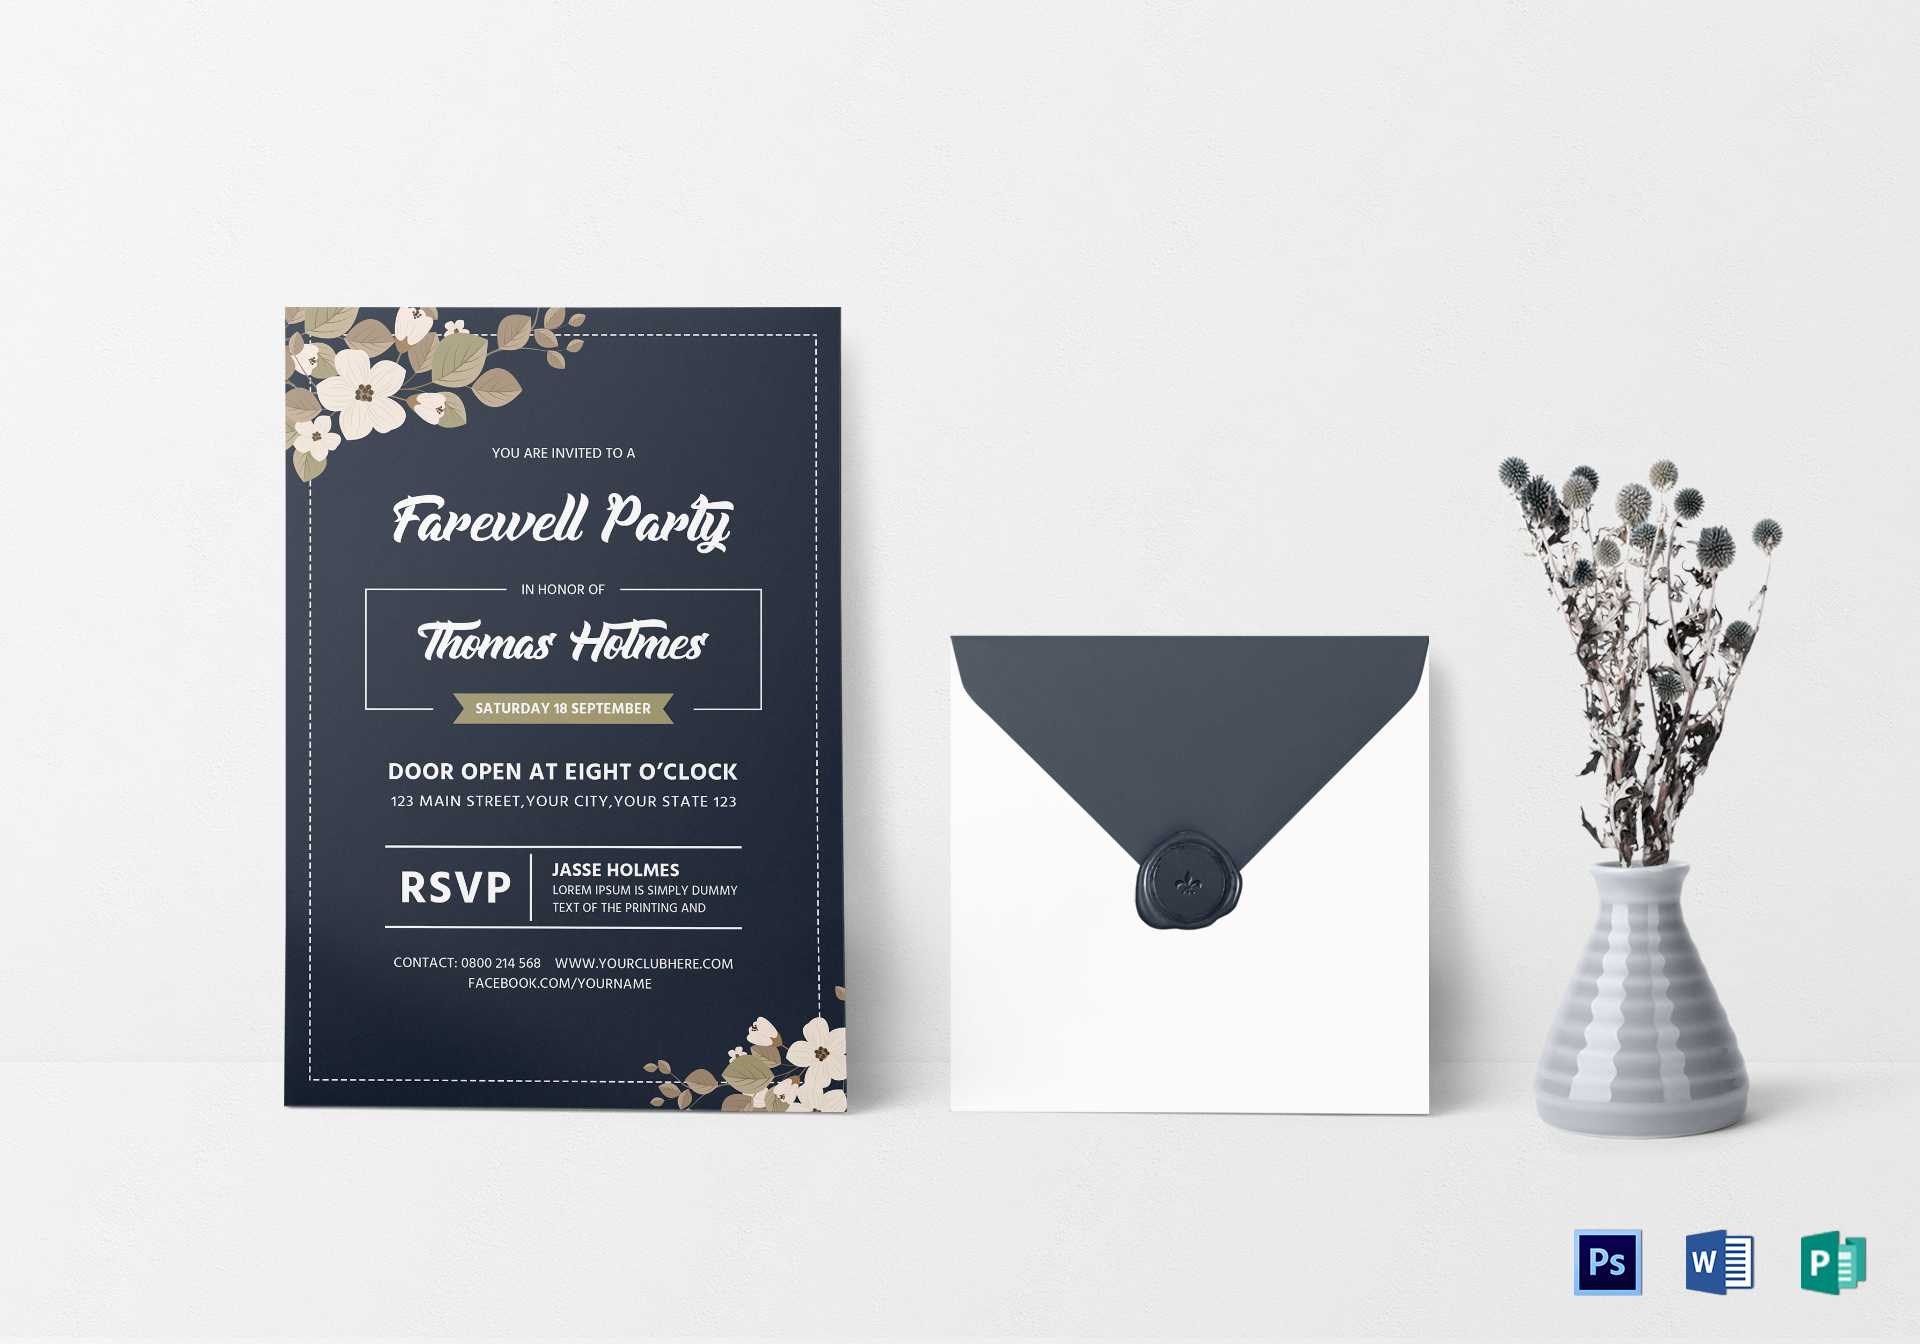 Farewell Party Invitation Card Template Within Farewell Invitation Card Template